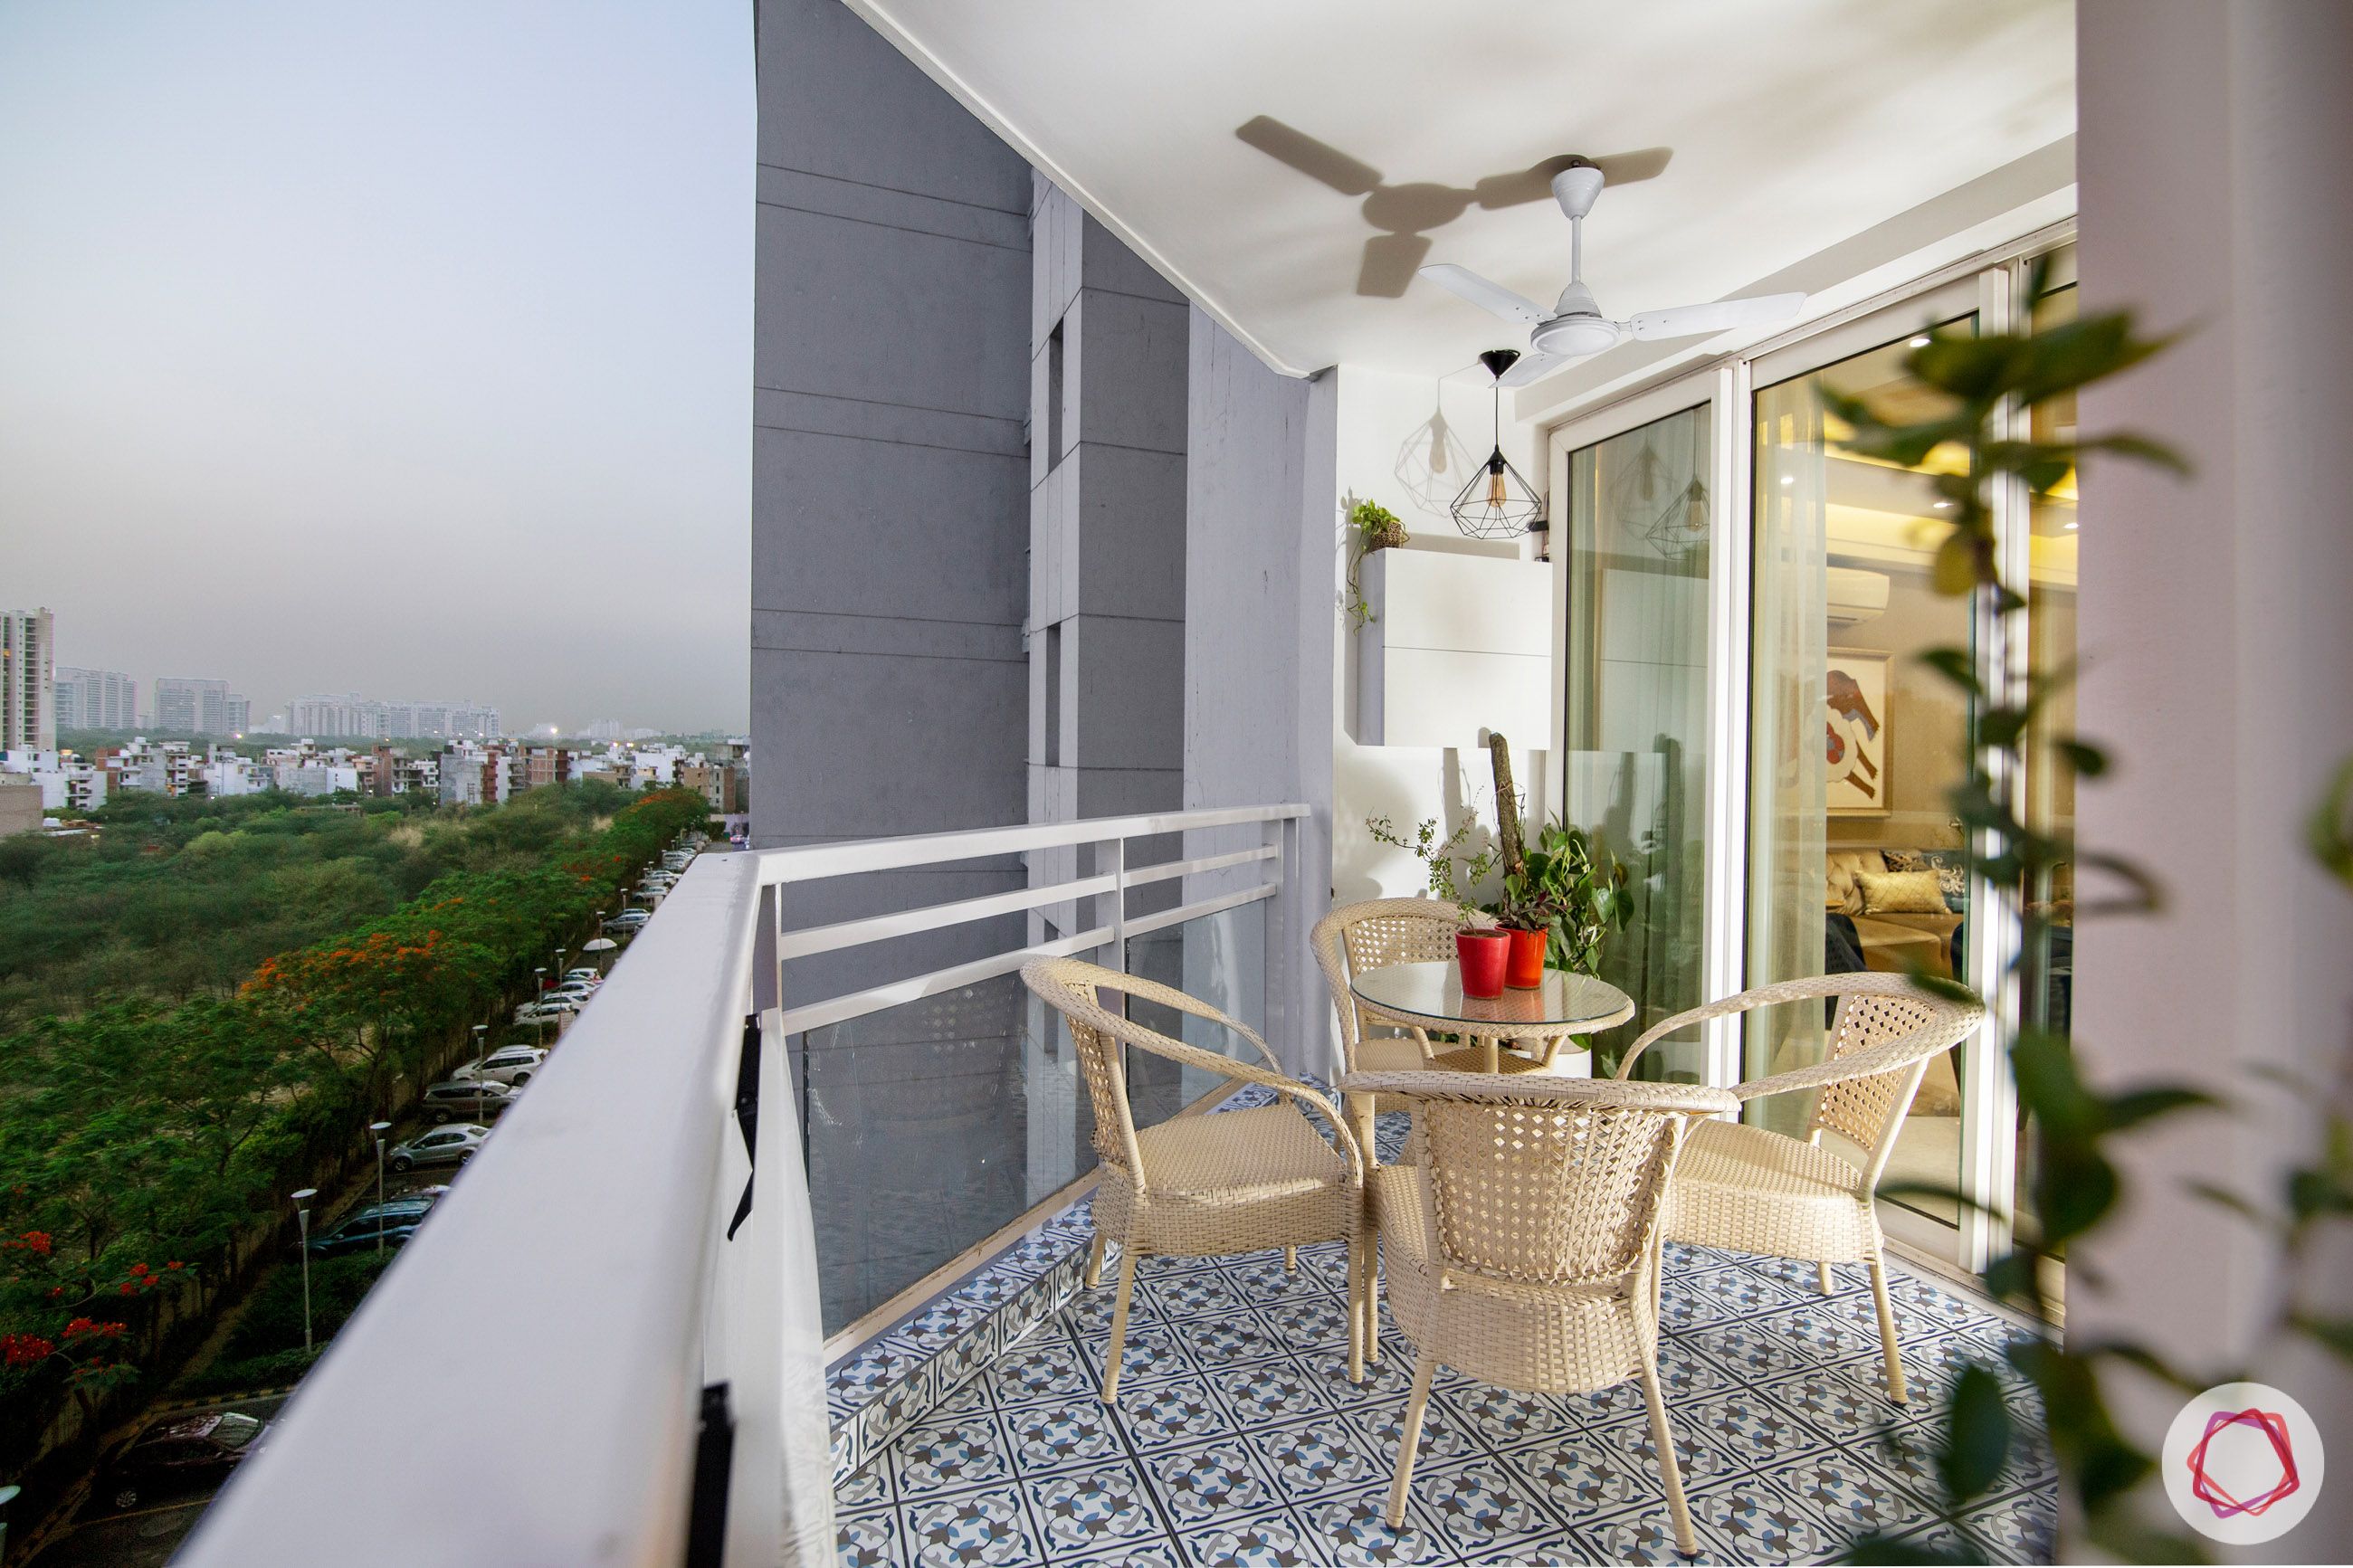 dlf park place-balcony-cane furniture-moroccan tile flooring